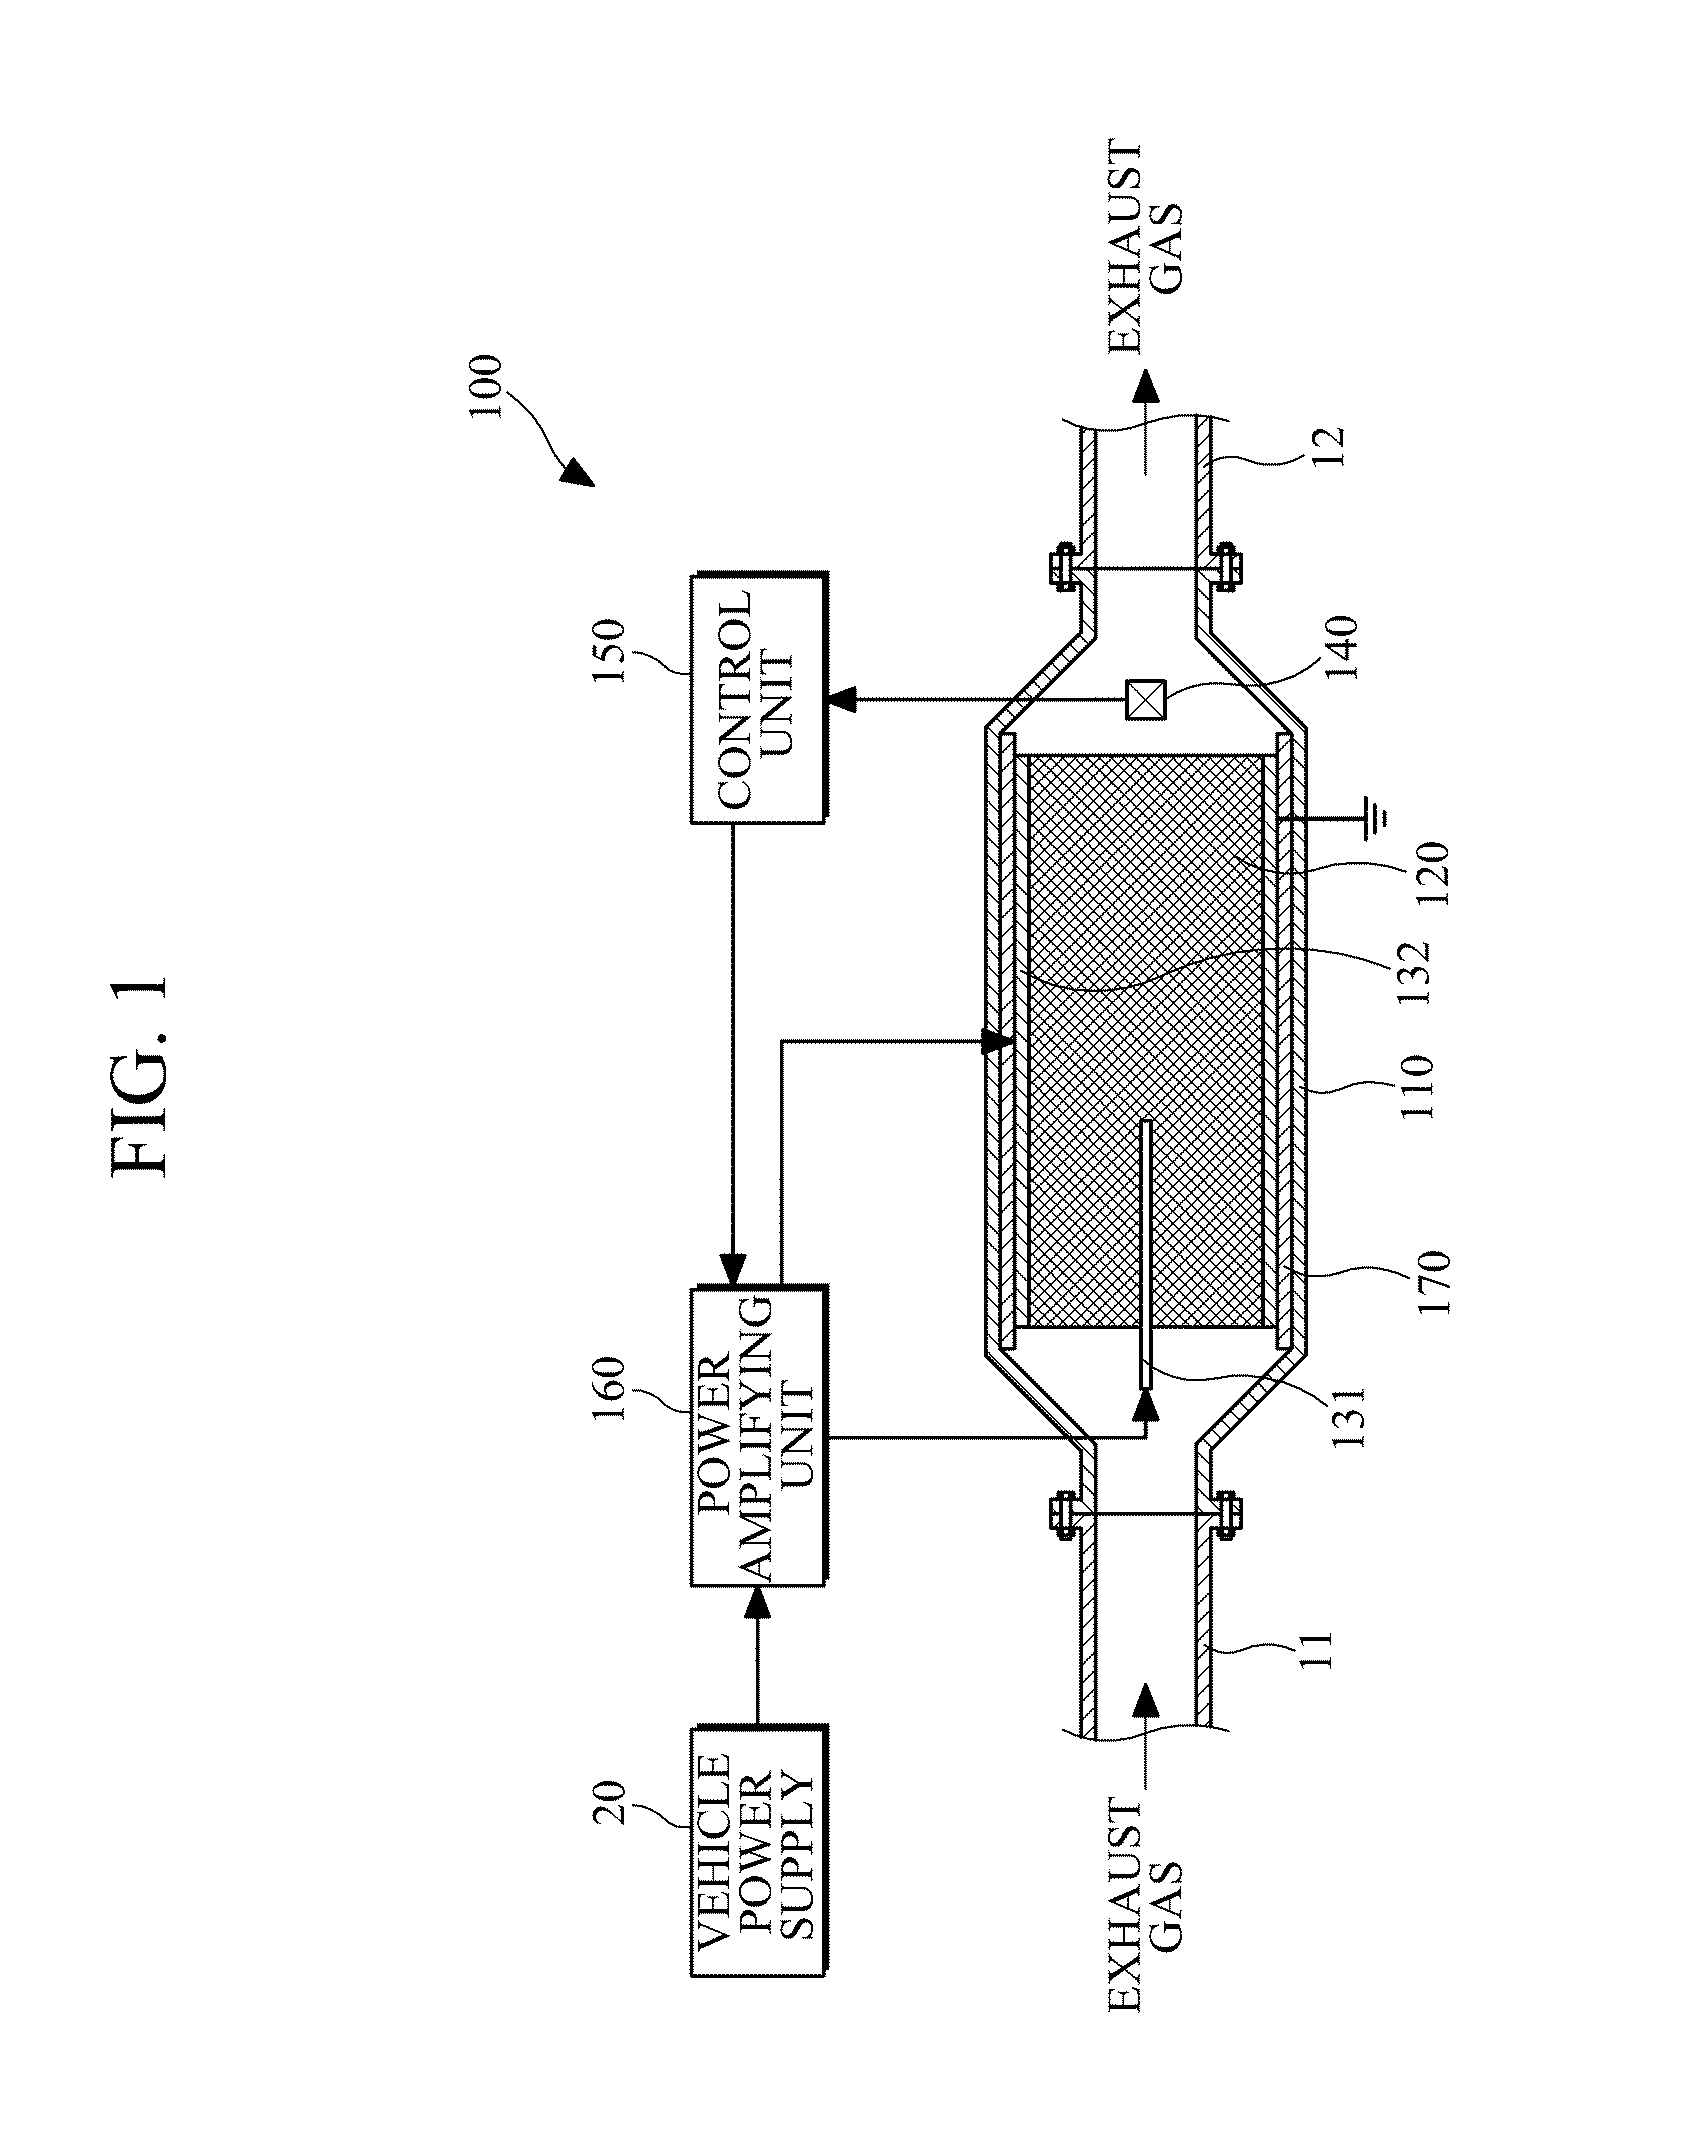 Particulate matter reduction apparatus for diesel engine